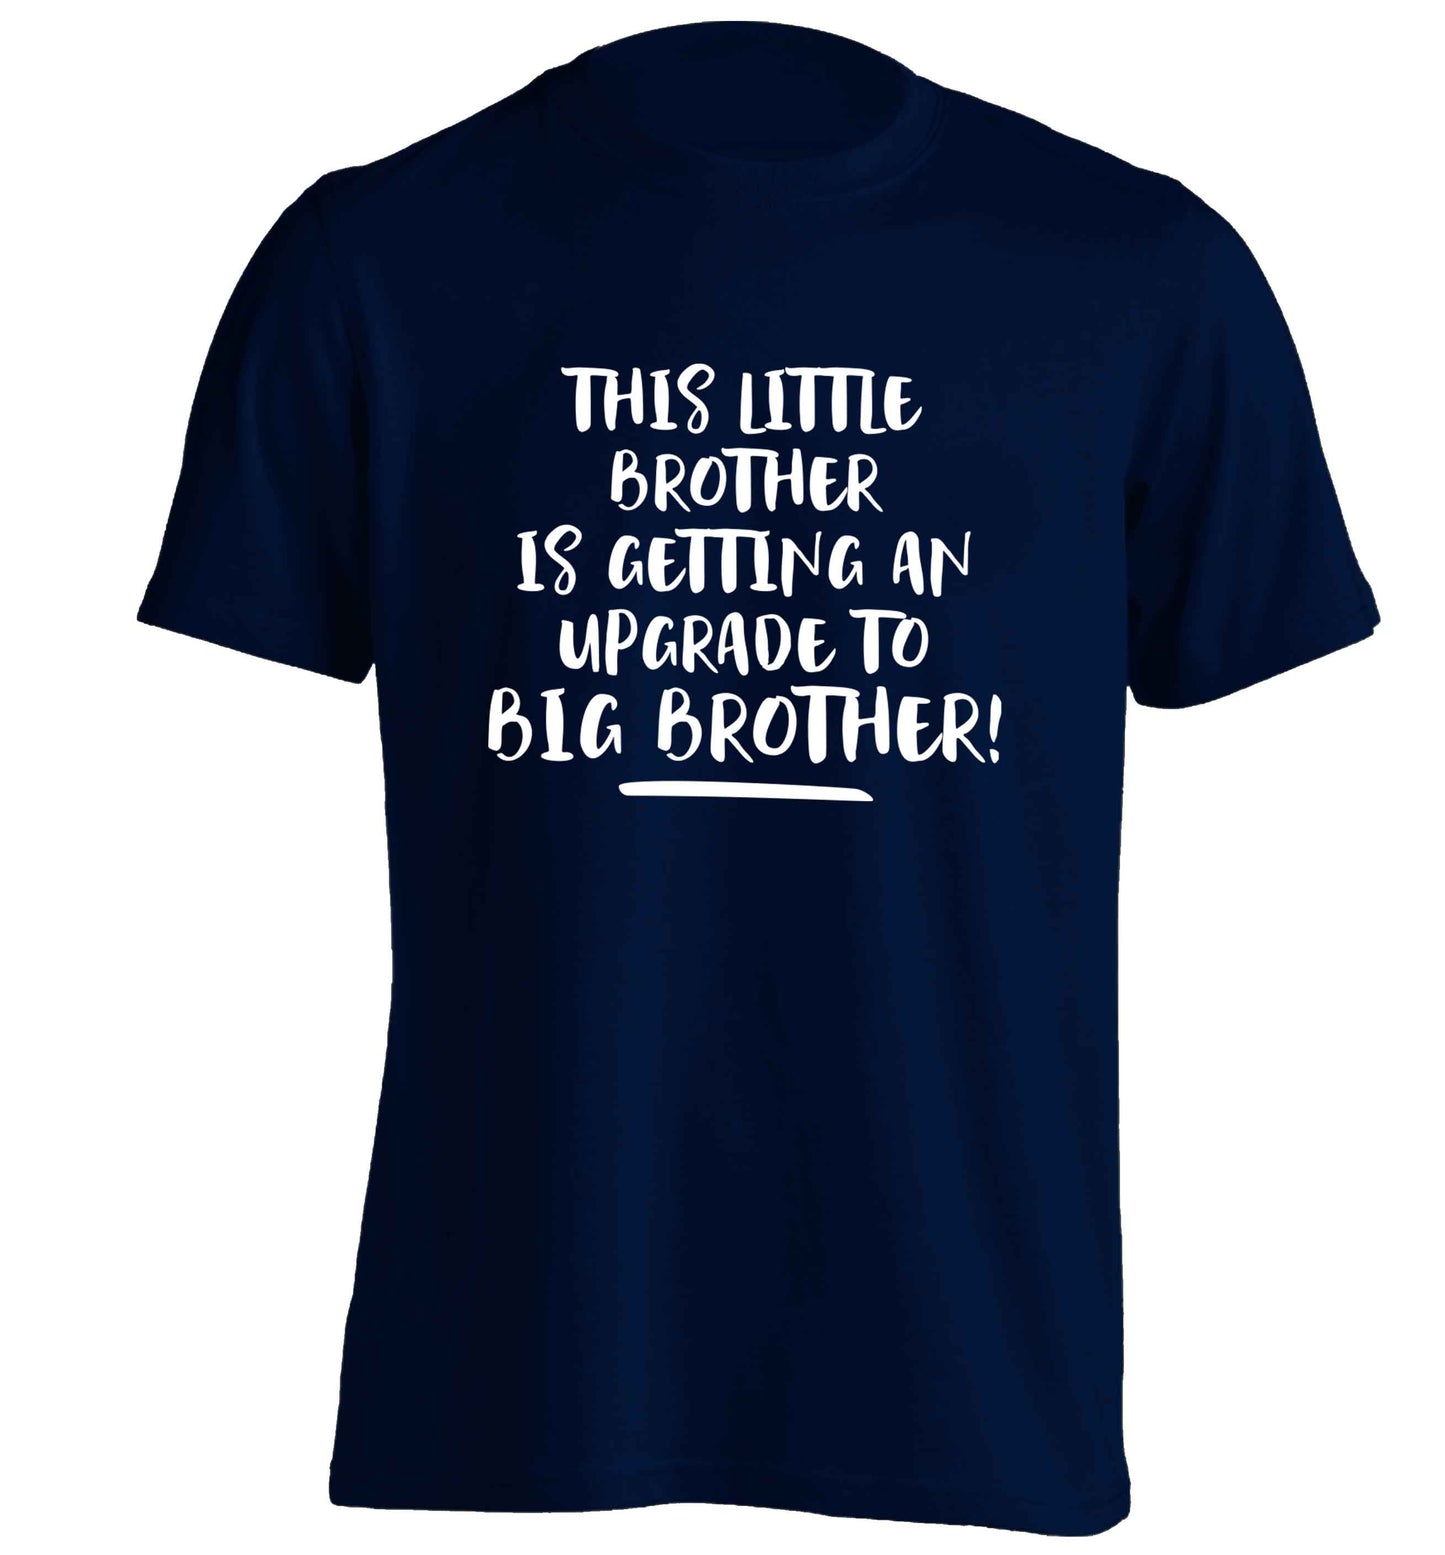 This little brother is getting an upgrade to big brother! adults unisex navy Tshirt 2XL